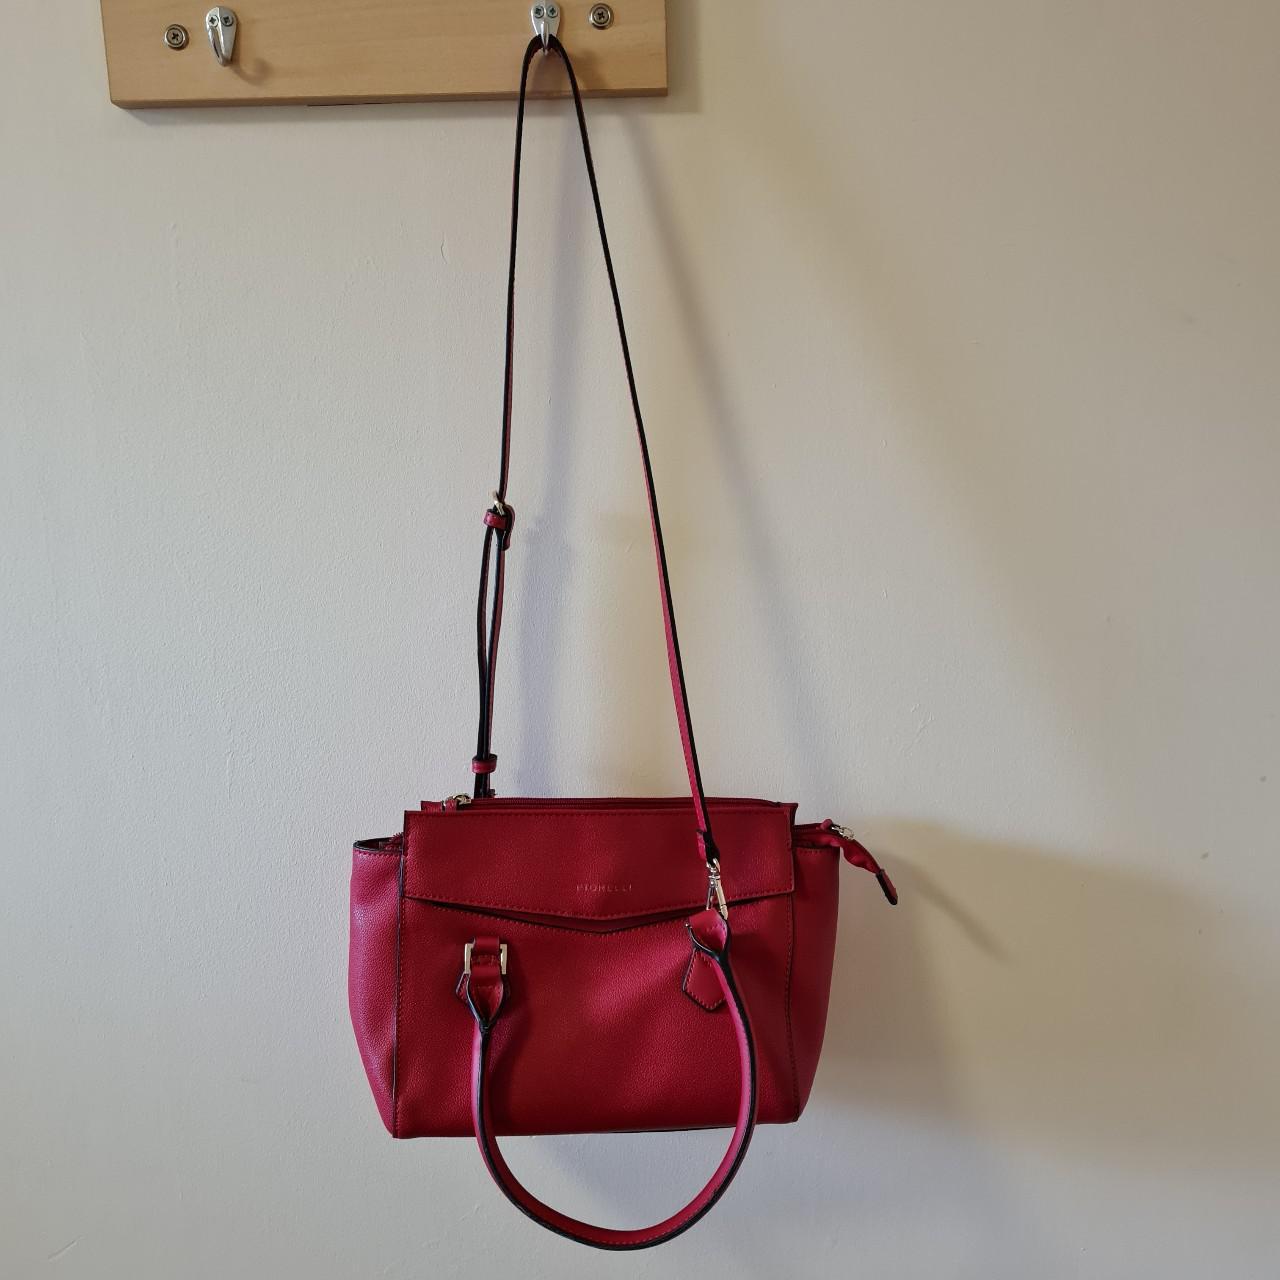 Product Image 3 - Red Fiorelli Bag with Shoulder